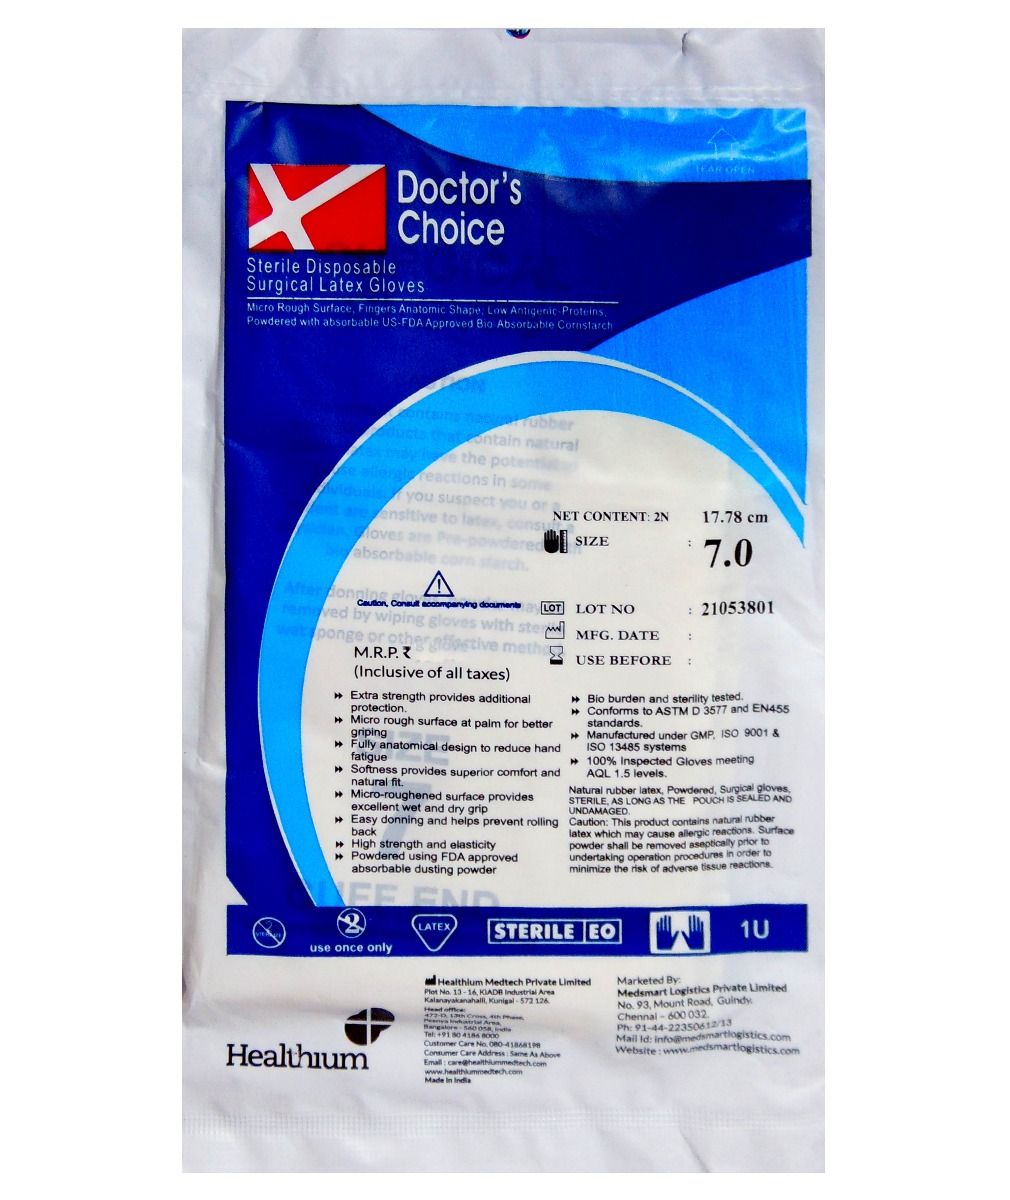 Buy Doctor's Choice Sterile Disposable Surgical Latex Gloves Size-7.0, 1 Pair Online